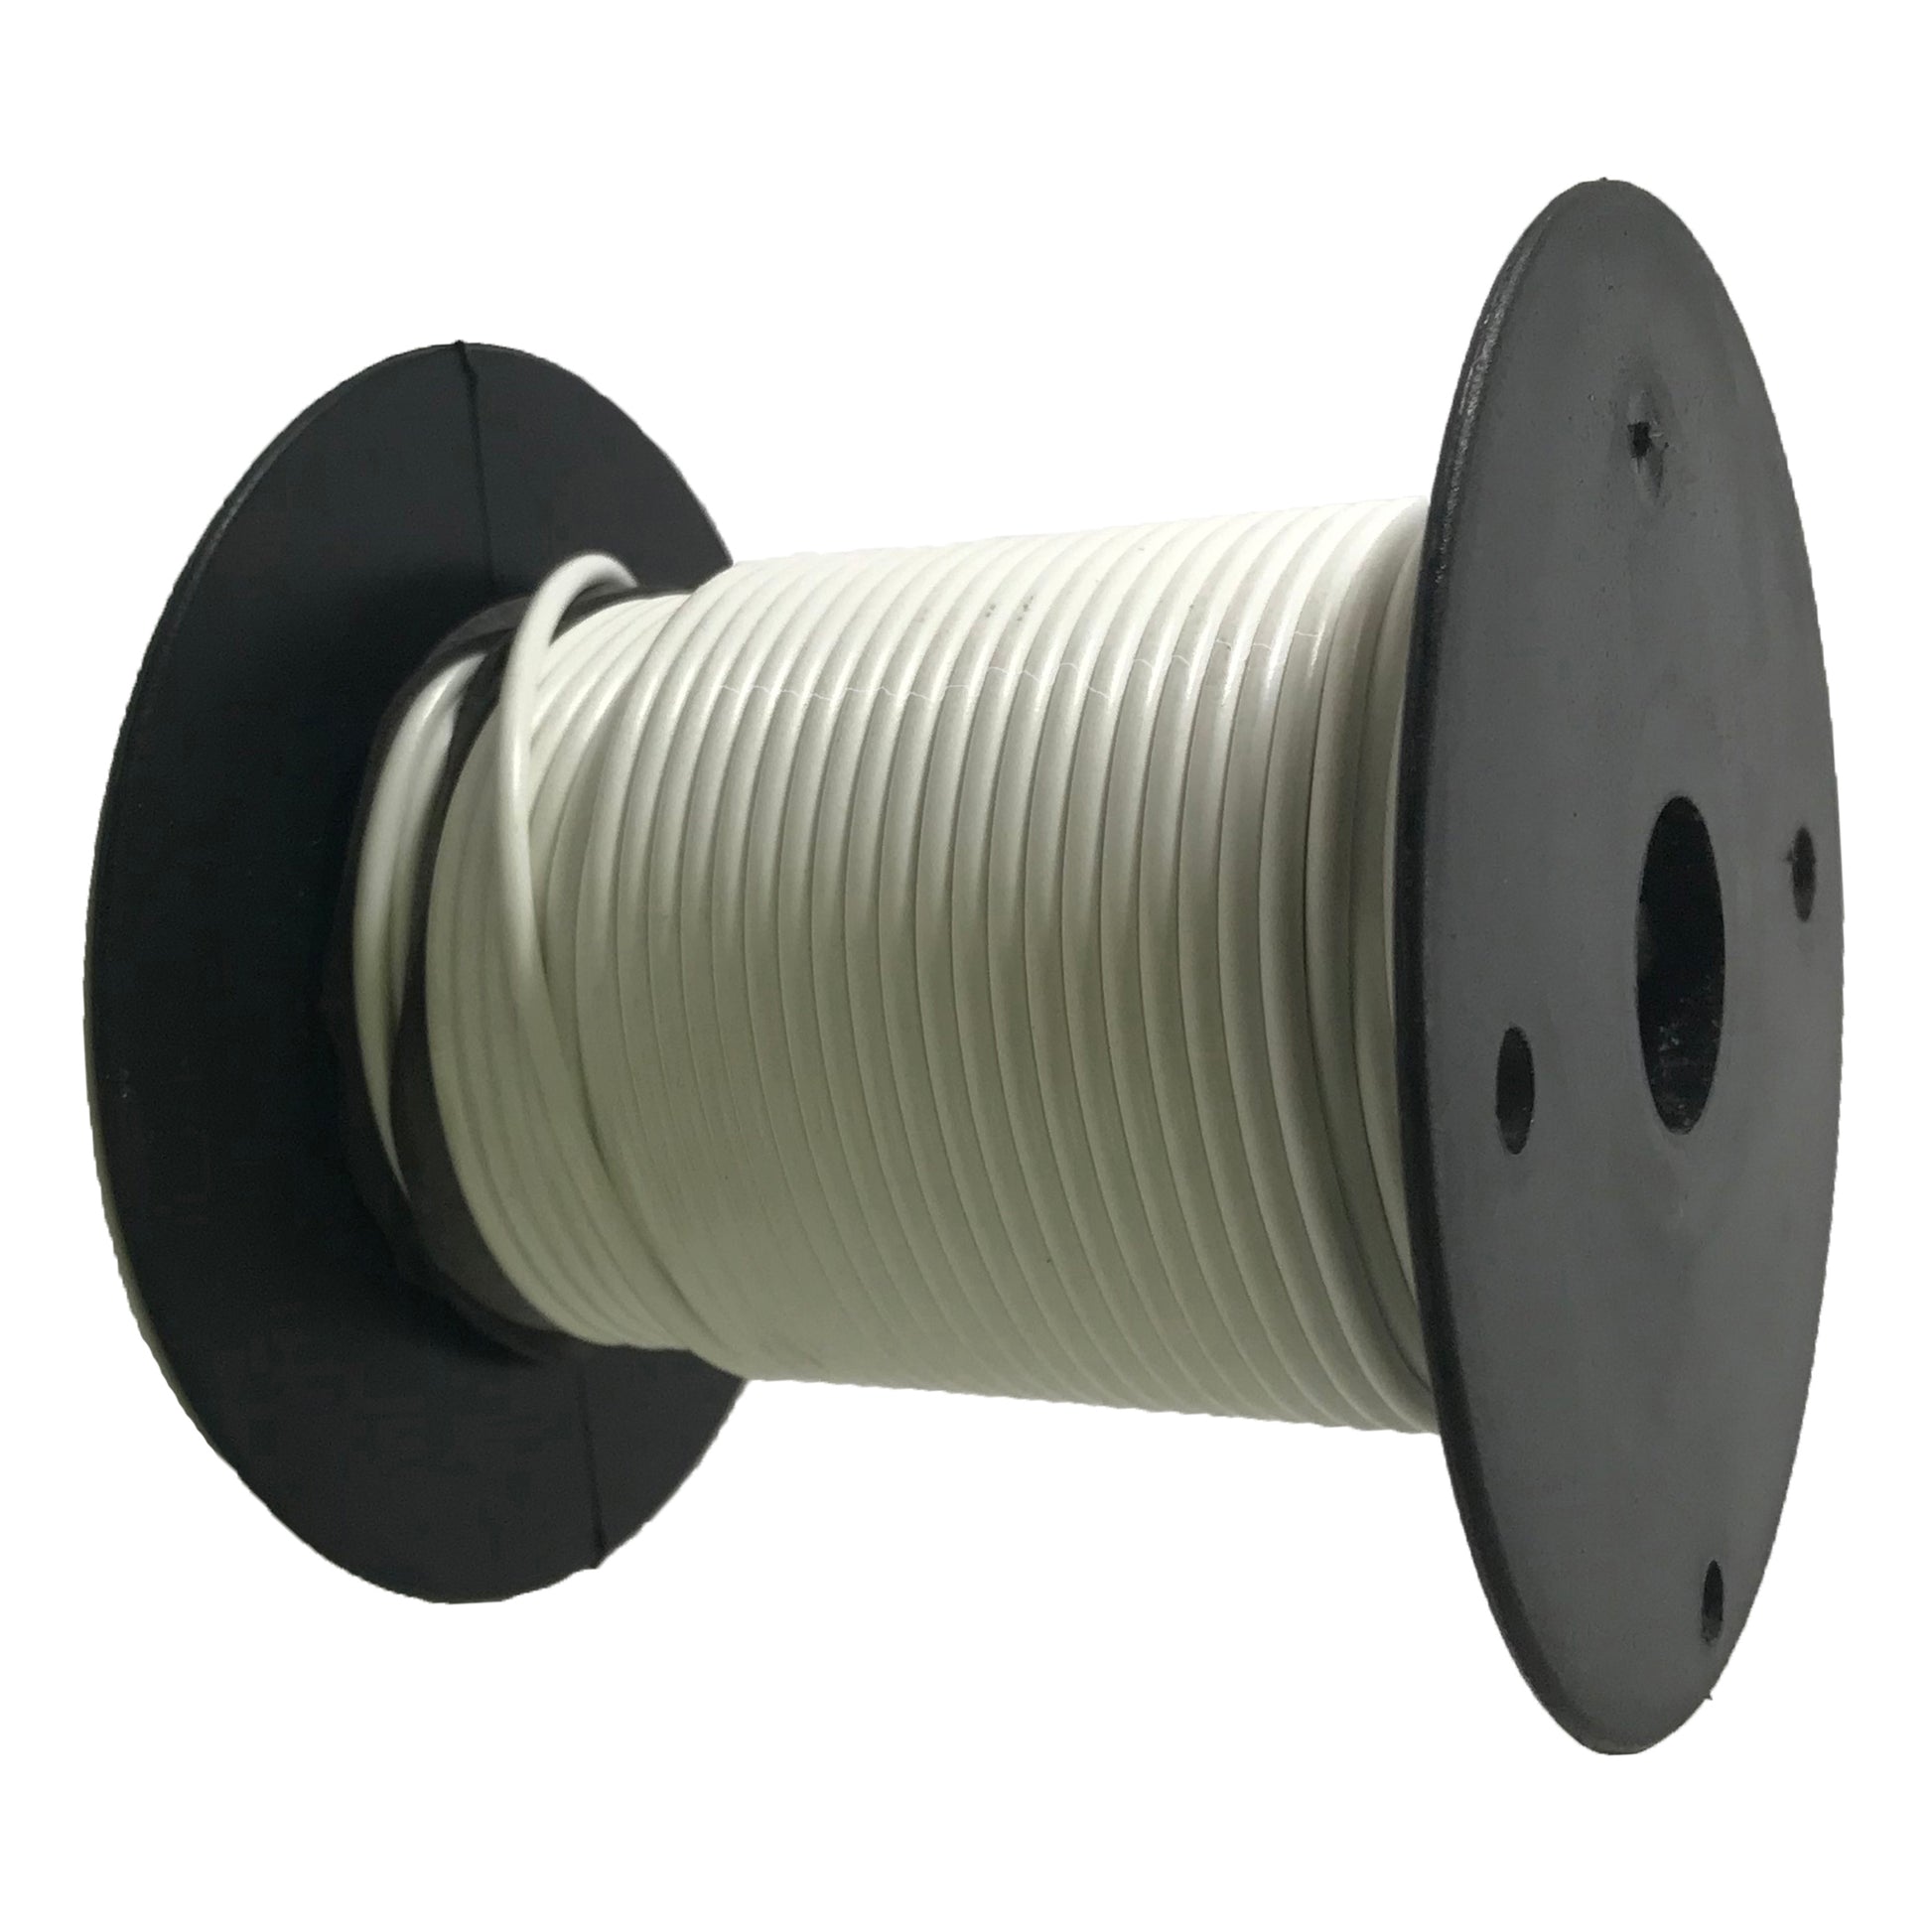 8 Gauge White Primary Wire - 100 FT